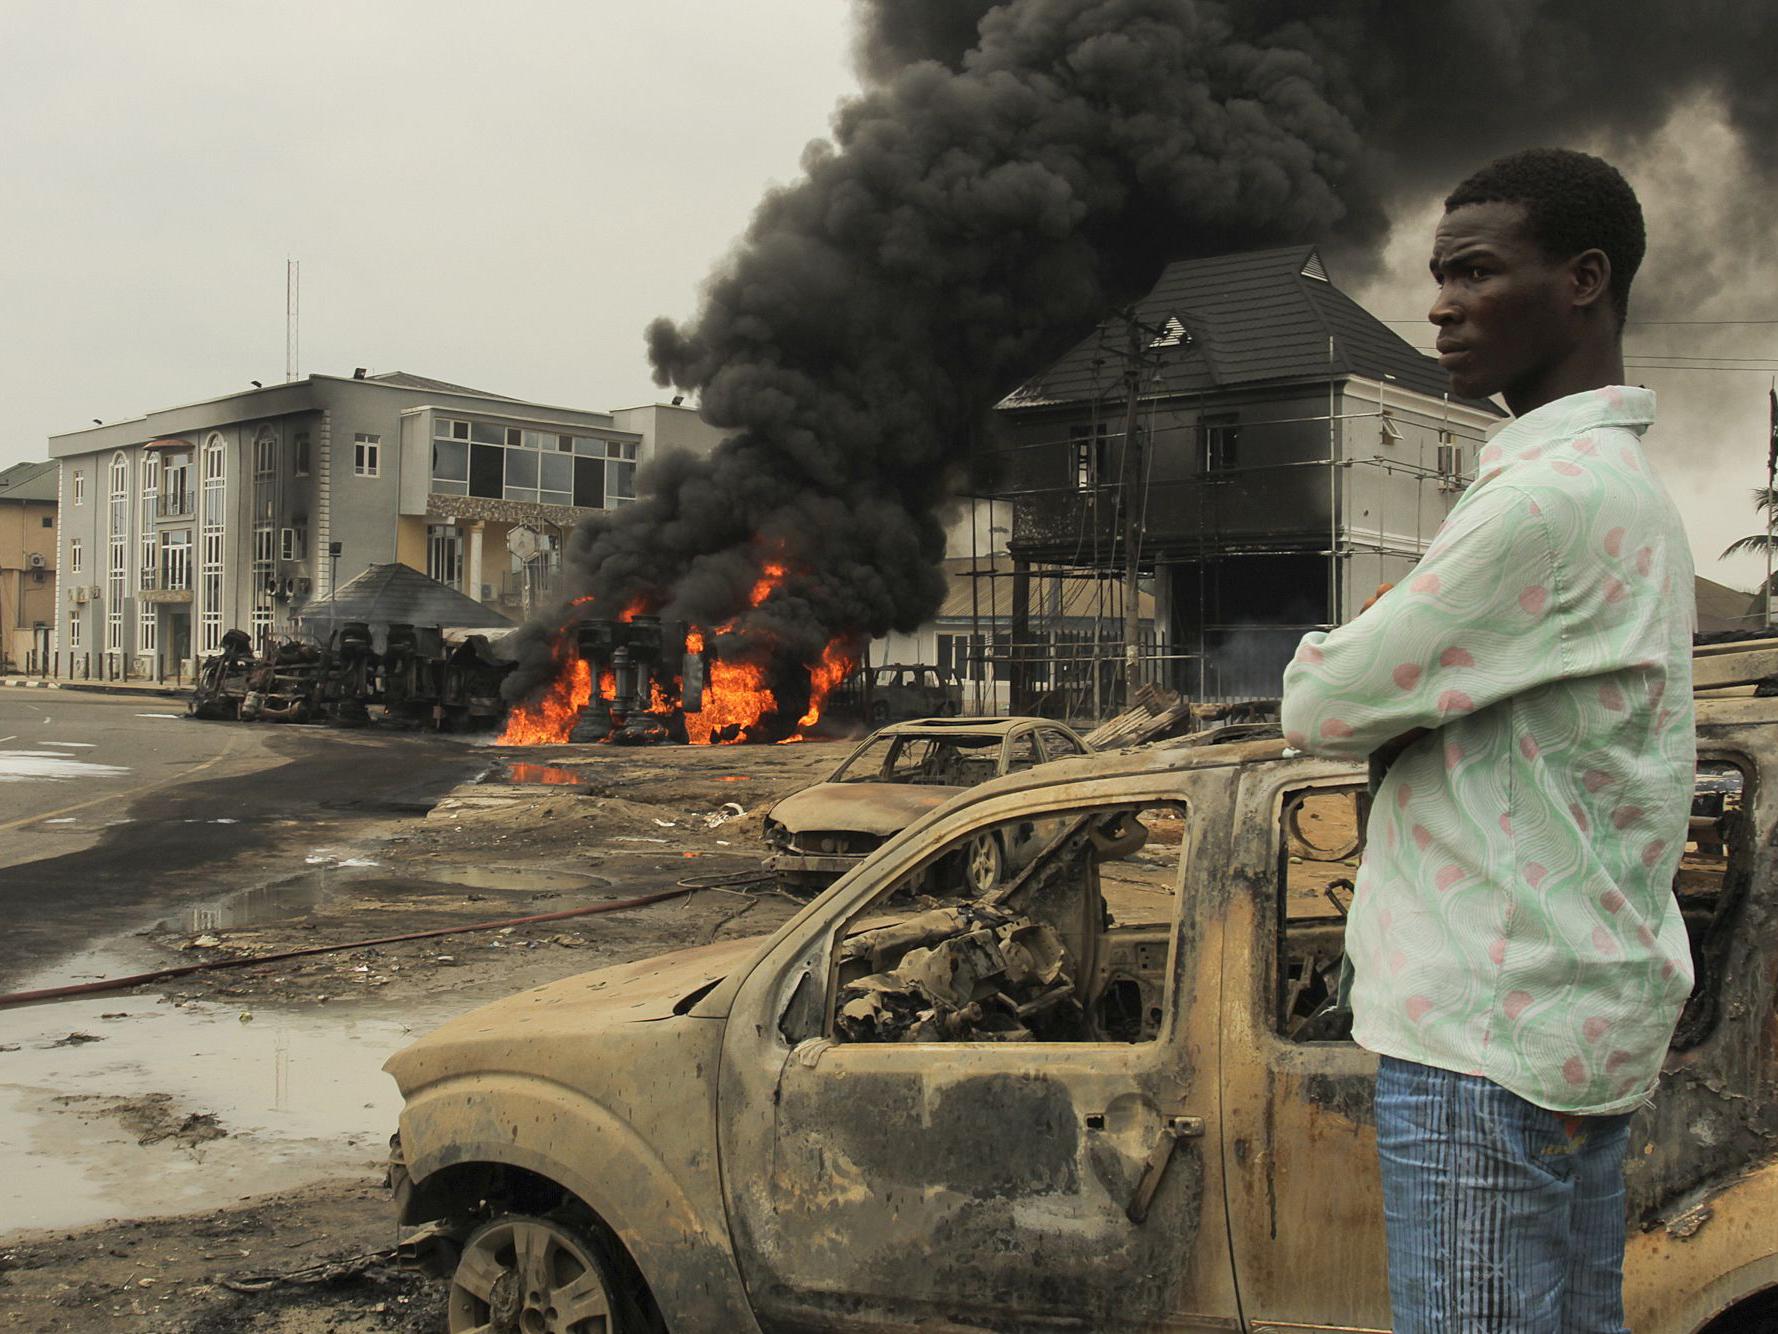 A Nigerian man looks over the scene at an oil tanker explosion in 2015